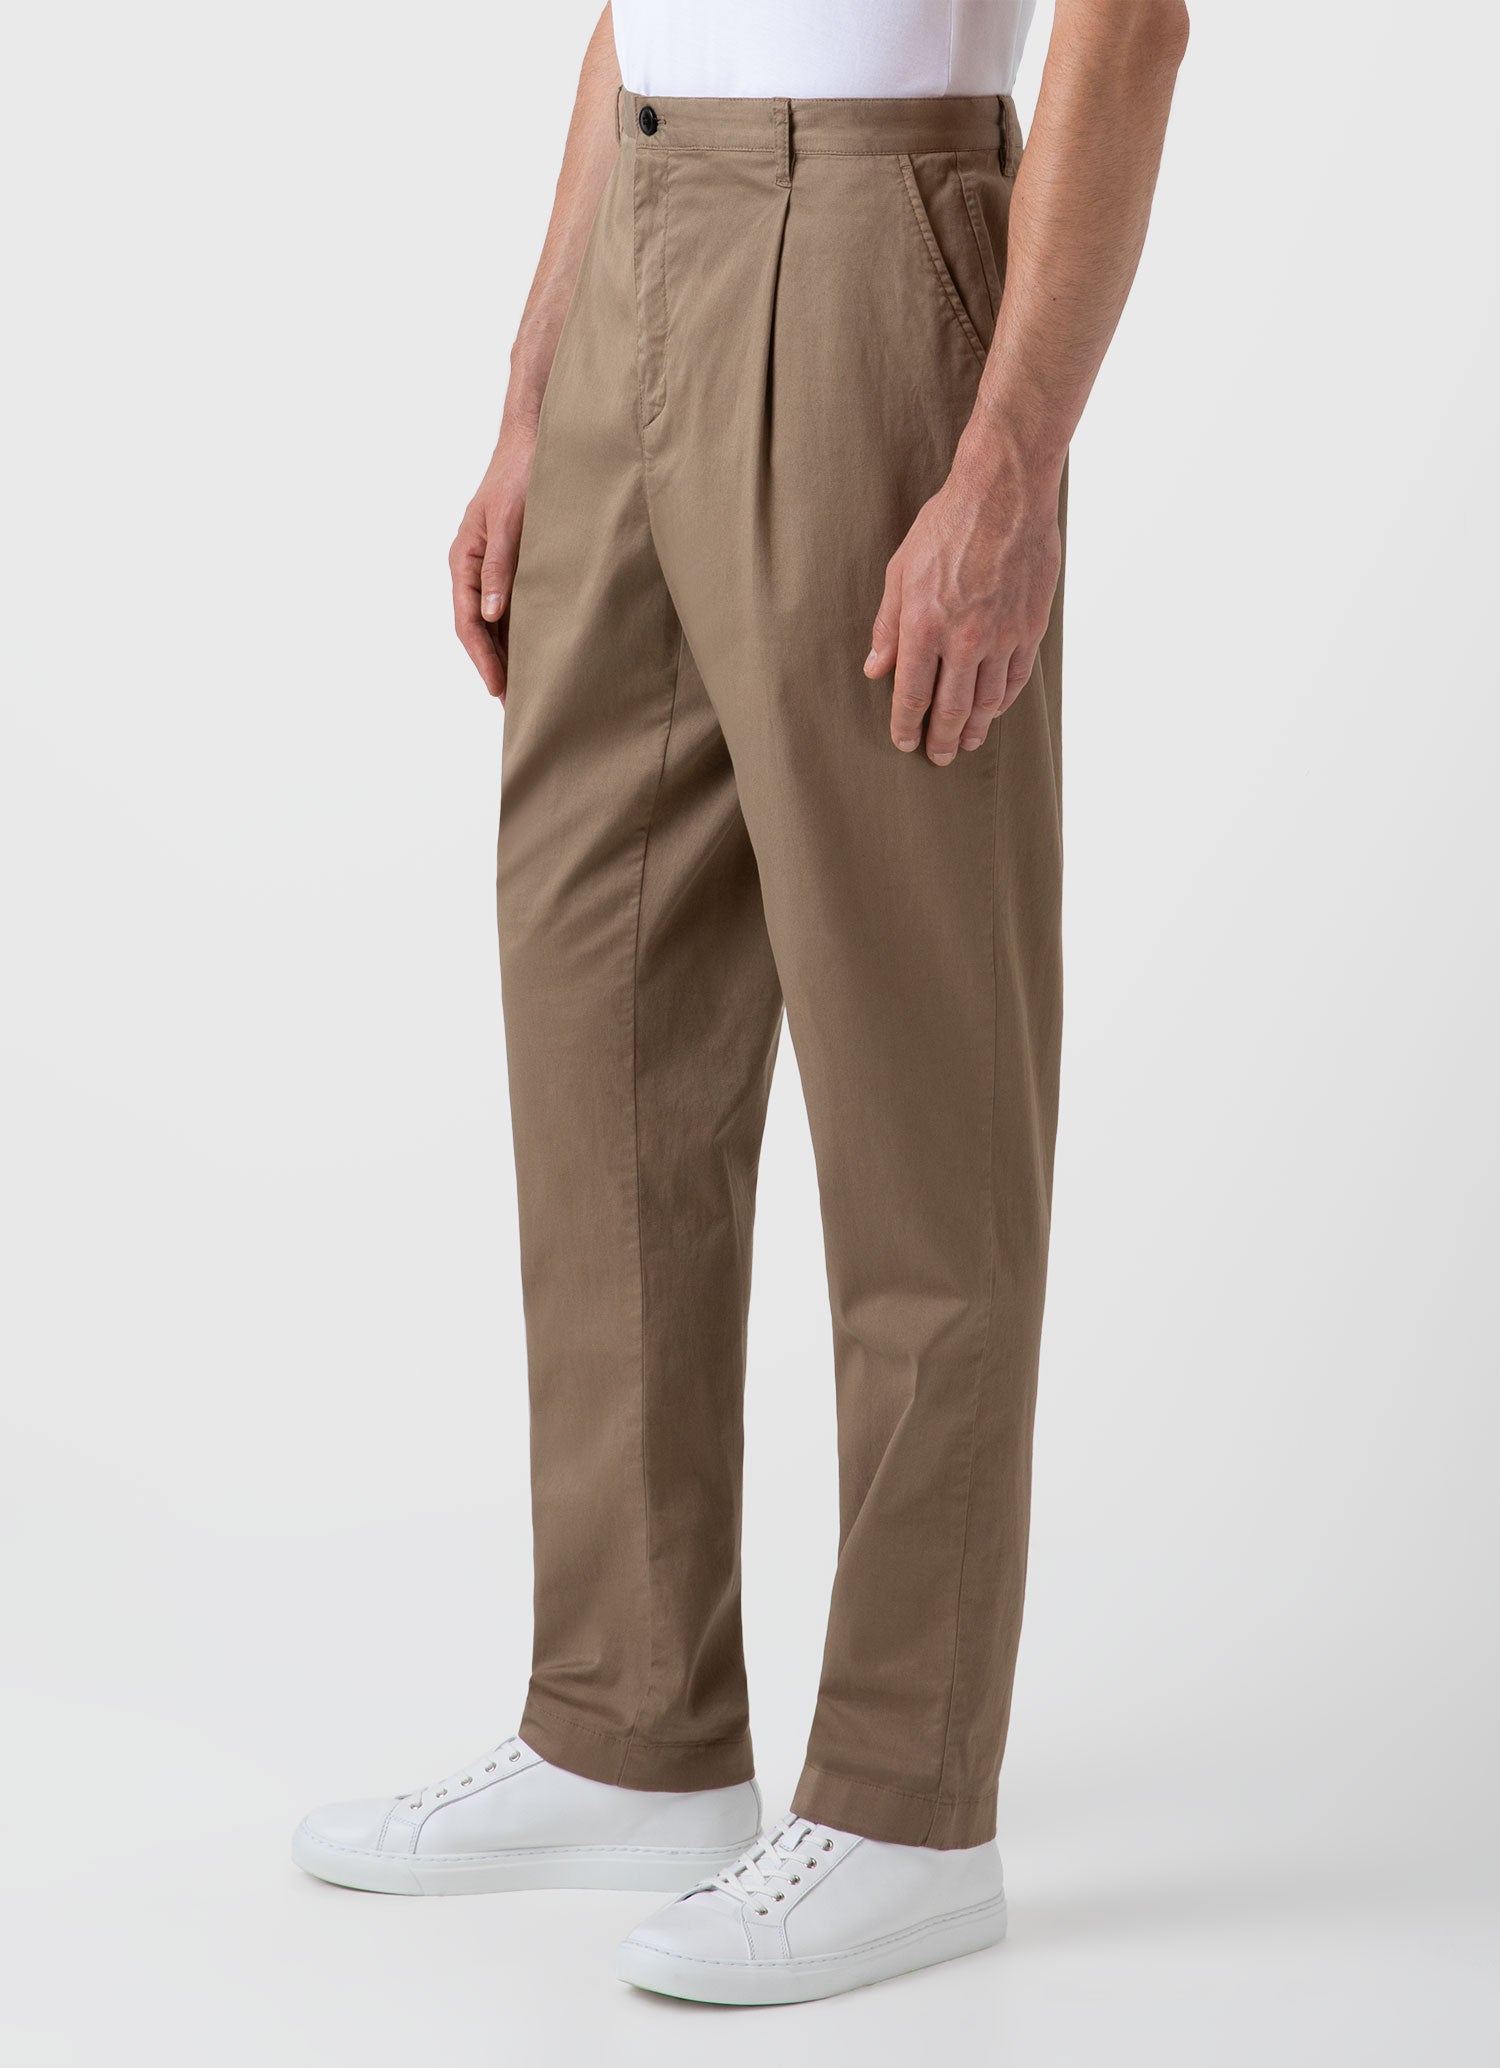 Men's Pleated Cotton Chino - Olive - Community Clothing